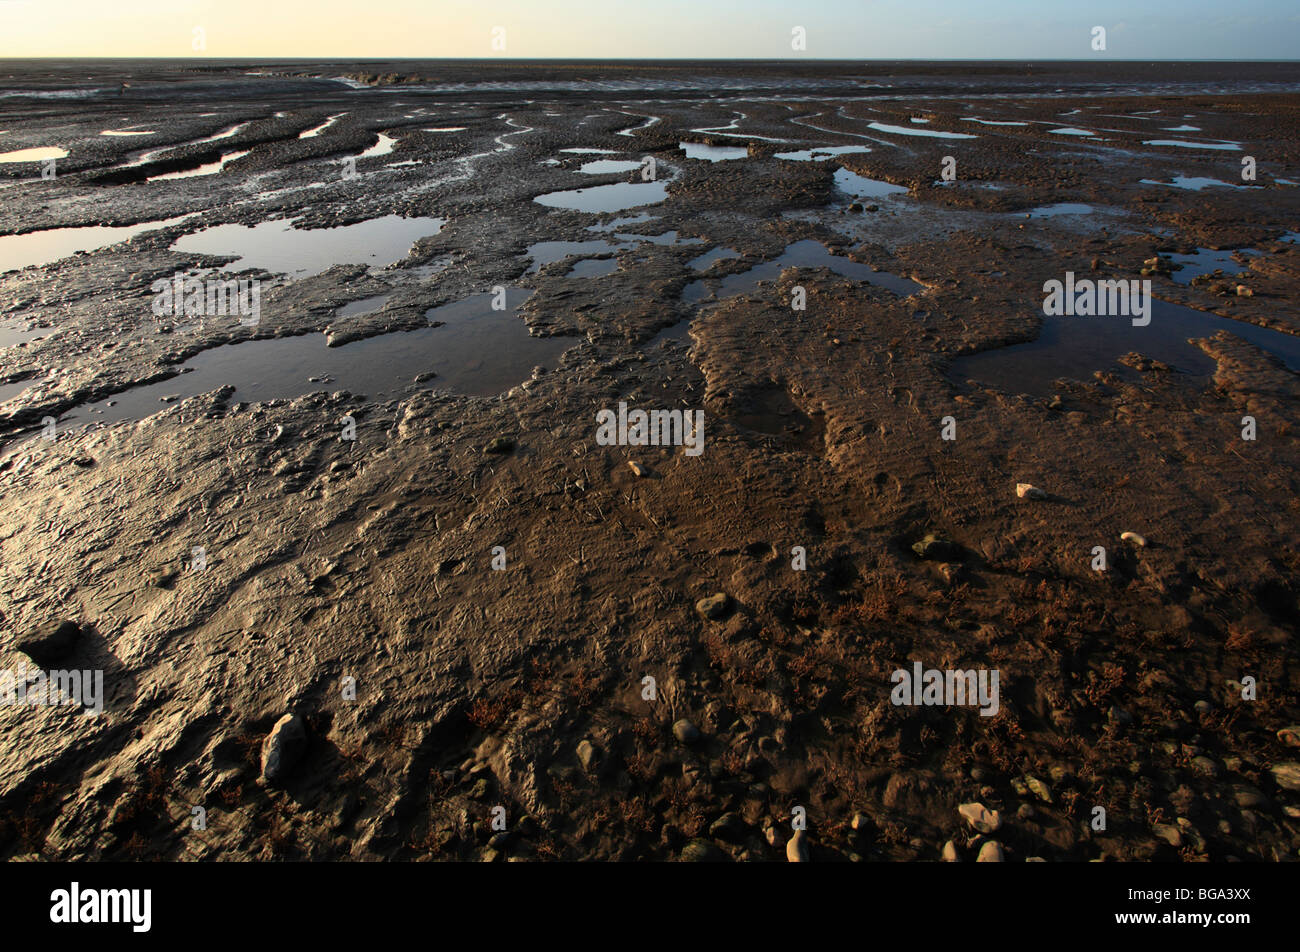 A view over the mud flats of The Wash at Snettisham on the Norfolk coast. Bird footprints are visible in the foreground. Stock Photo